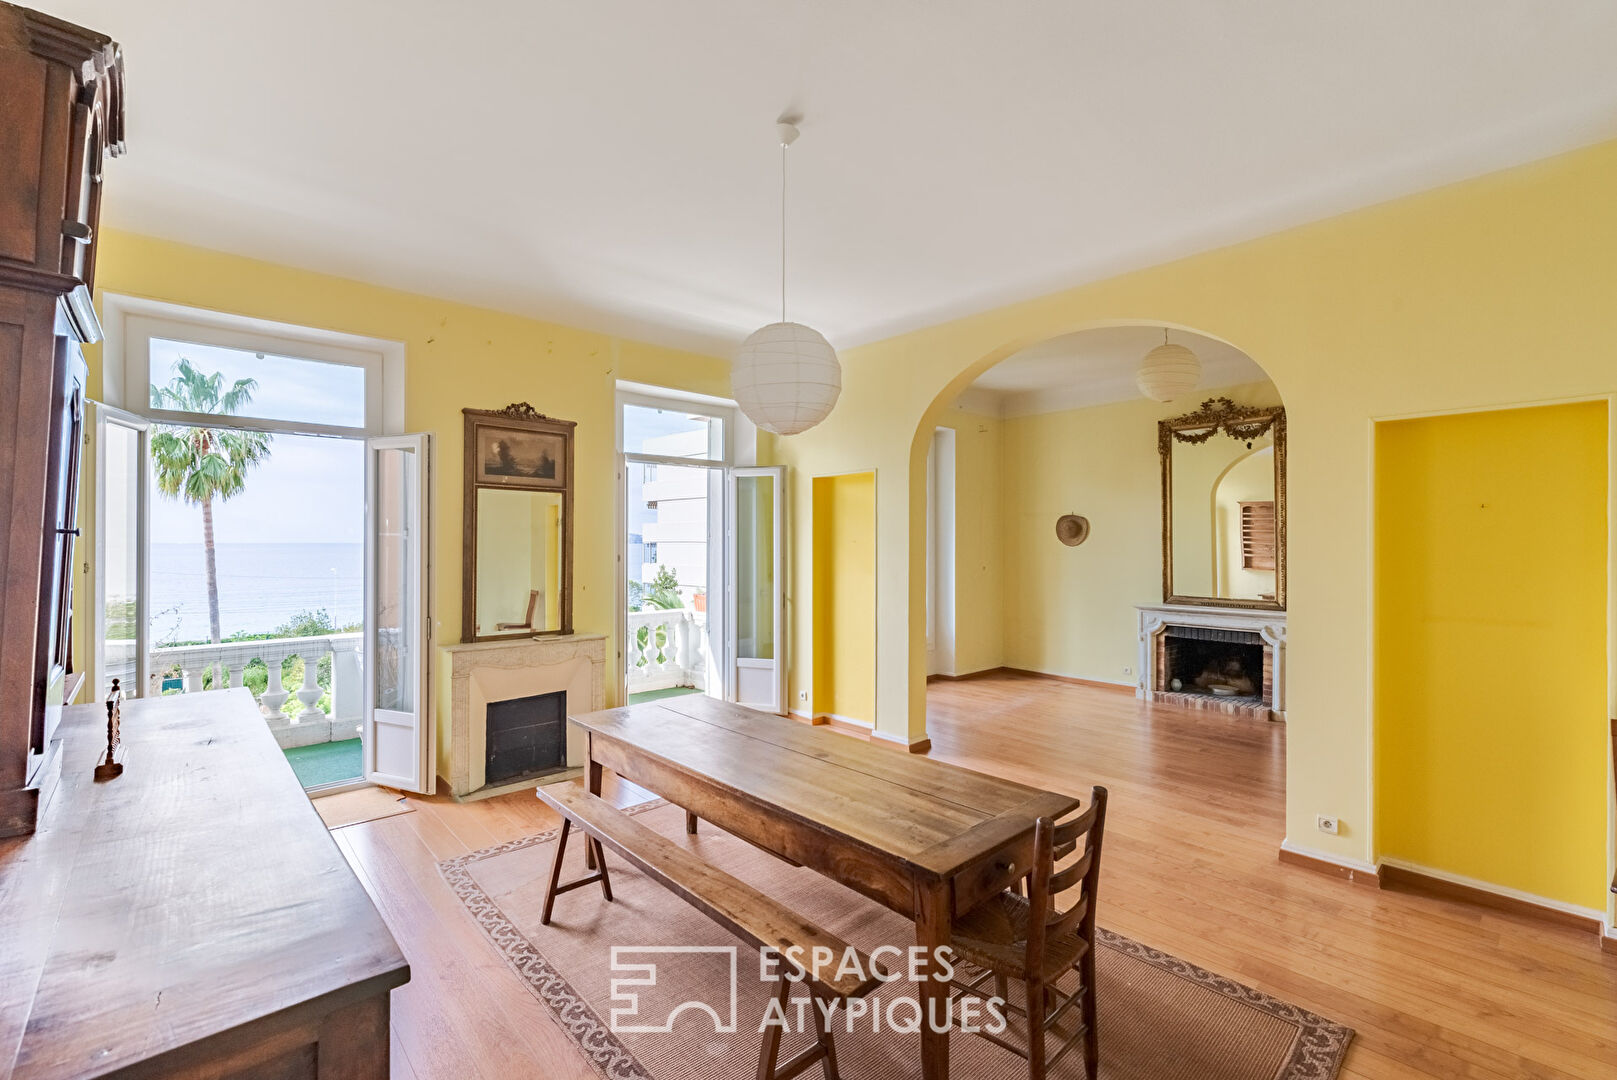 Beautiful apartment with sea view terrace, in a former private mansion